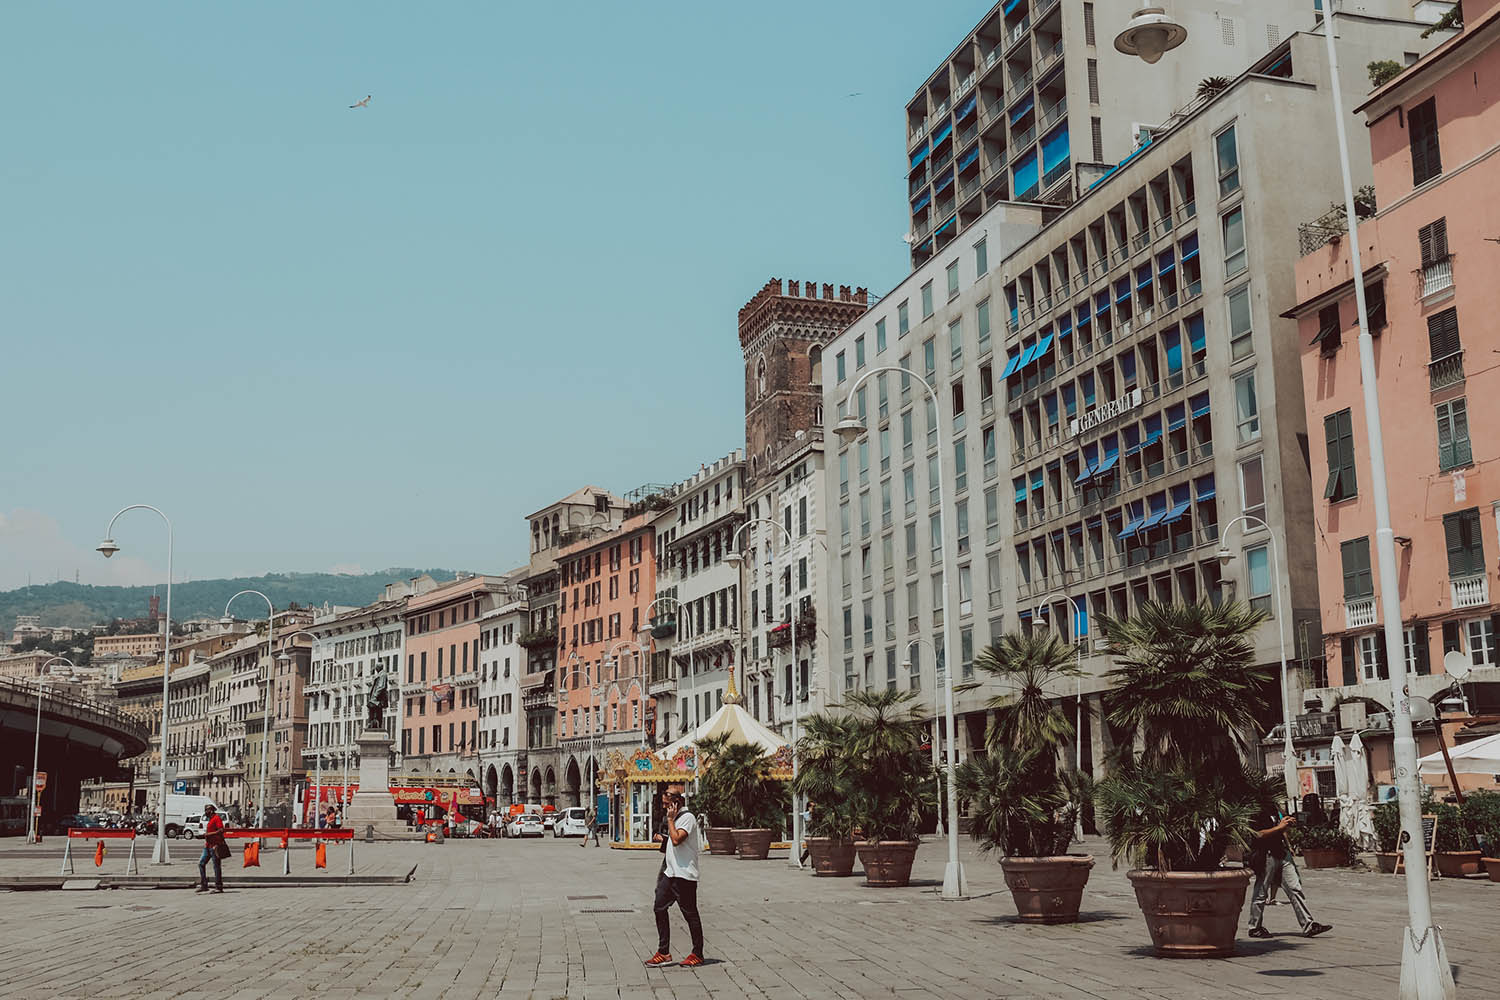 Complete guide to Genoa Italy - Fun things to do in Genoa #Italy